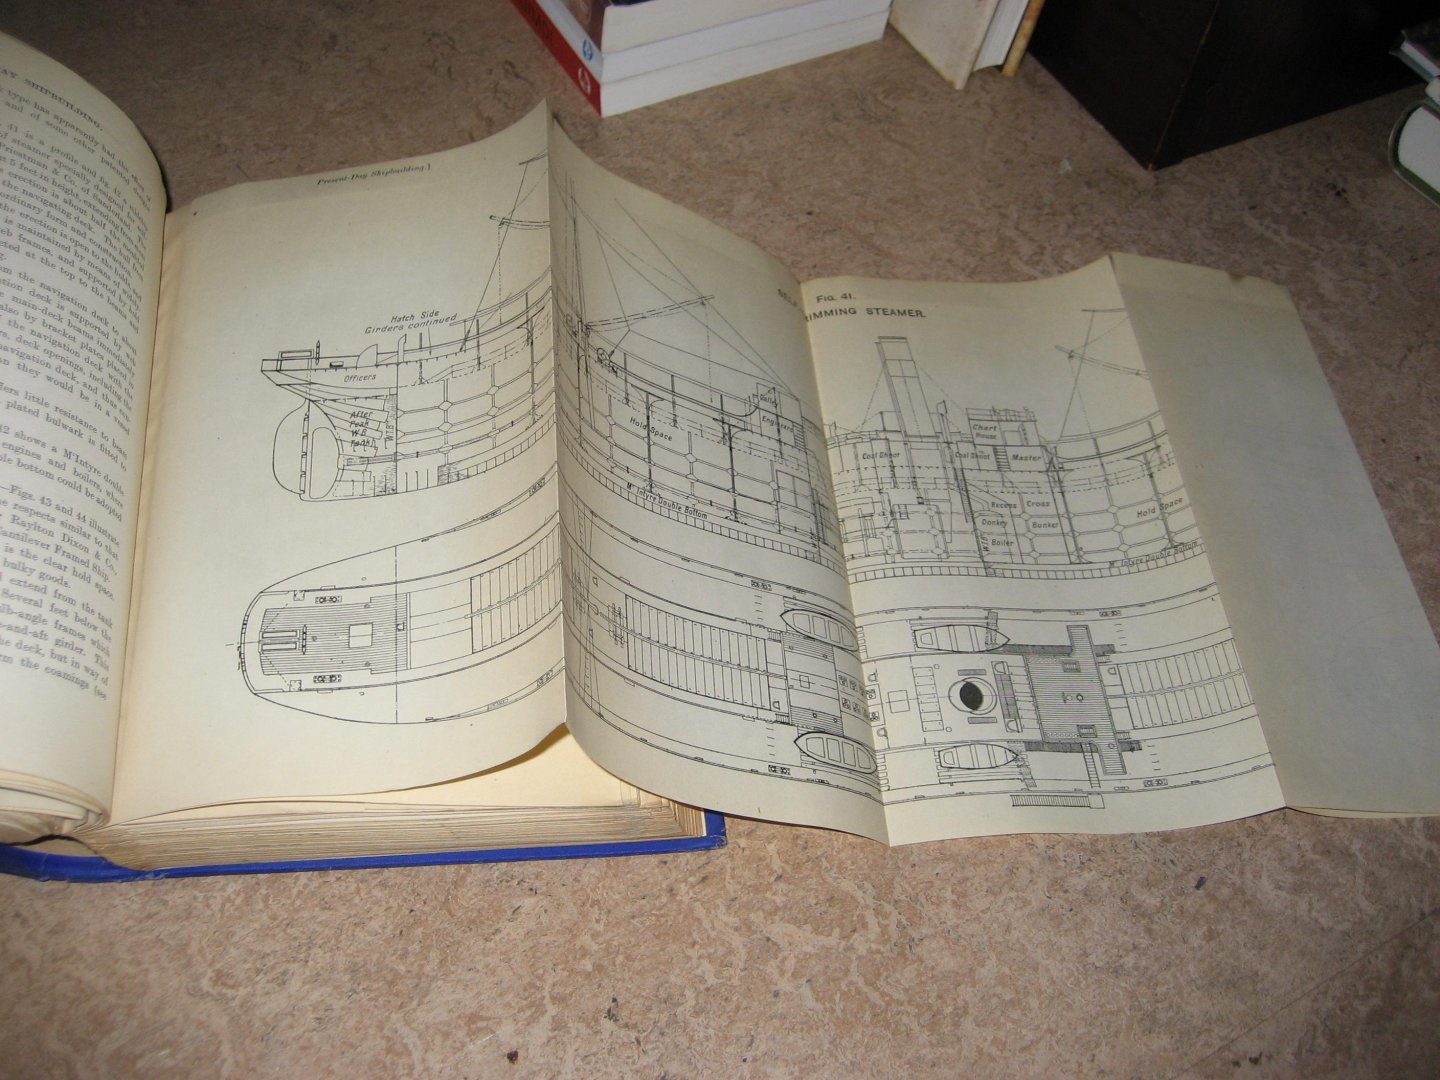 Walton, Thomas - Steel Ships: Their Construction and Maintenance. A Manual for Shipbuilders, Ship Superintendents, Students, and Marine Engineers